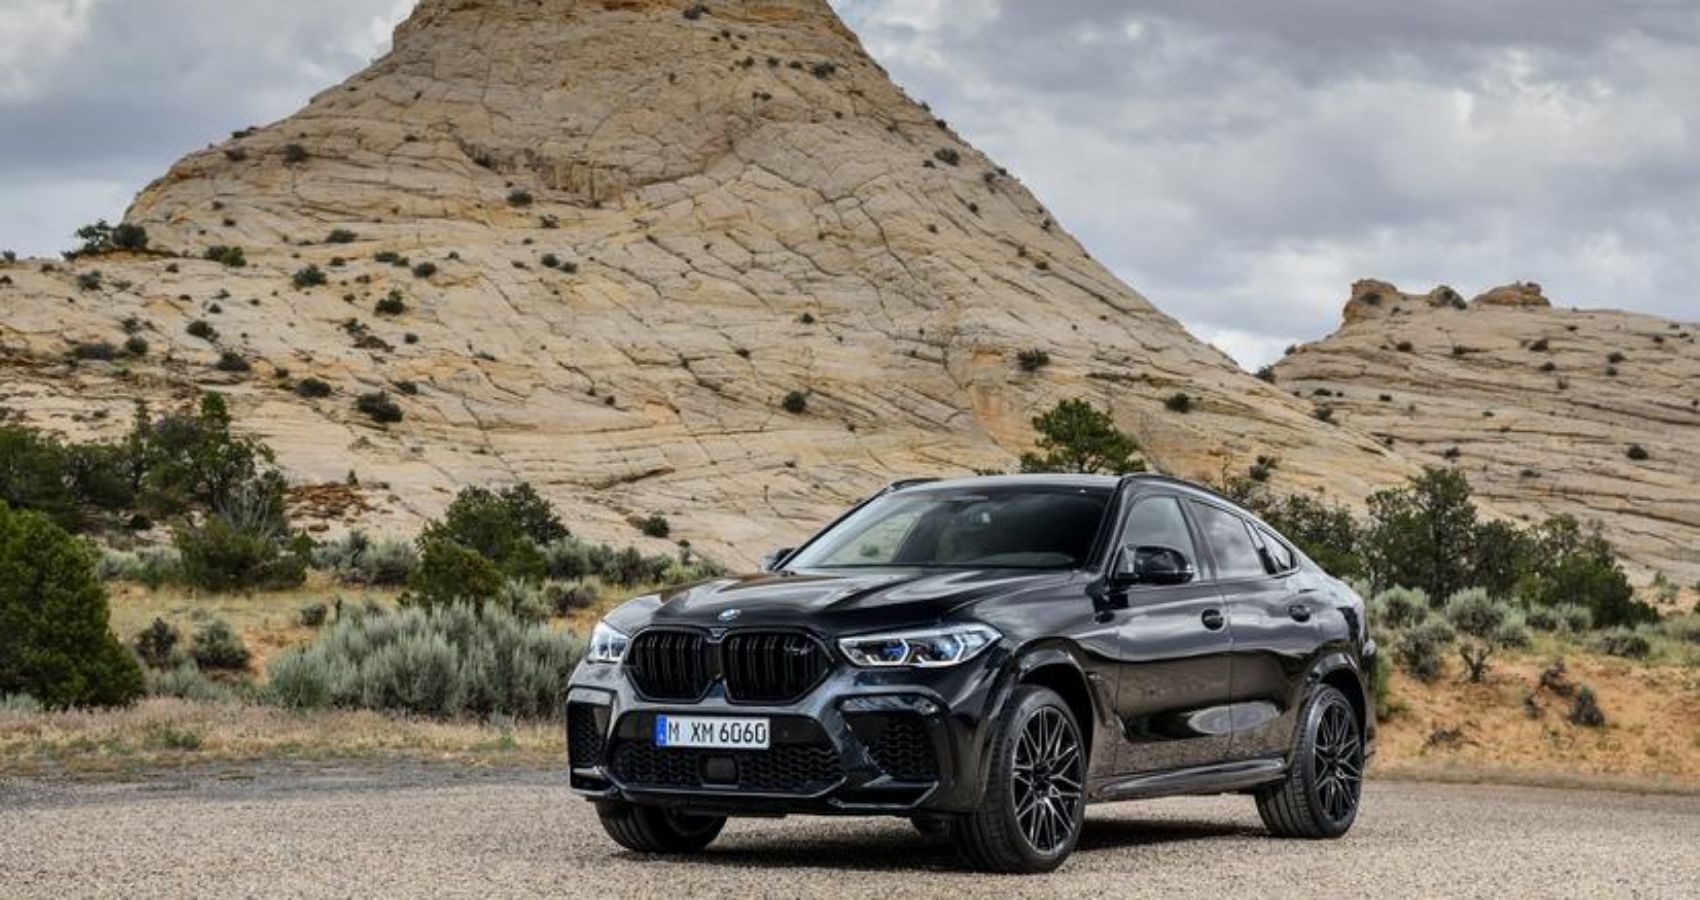 2022 BMW X6 M Competition flaunting its gorgeous black exterior